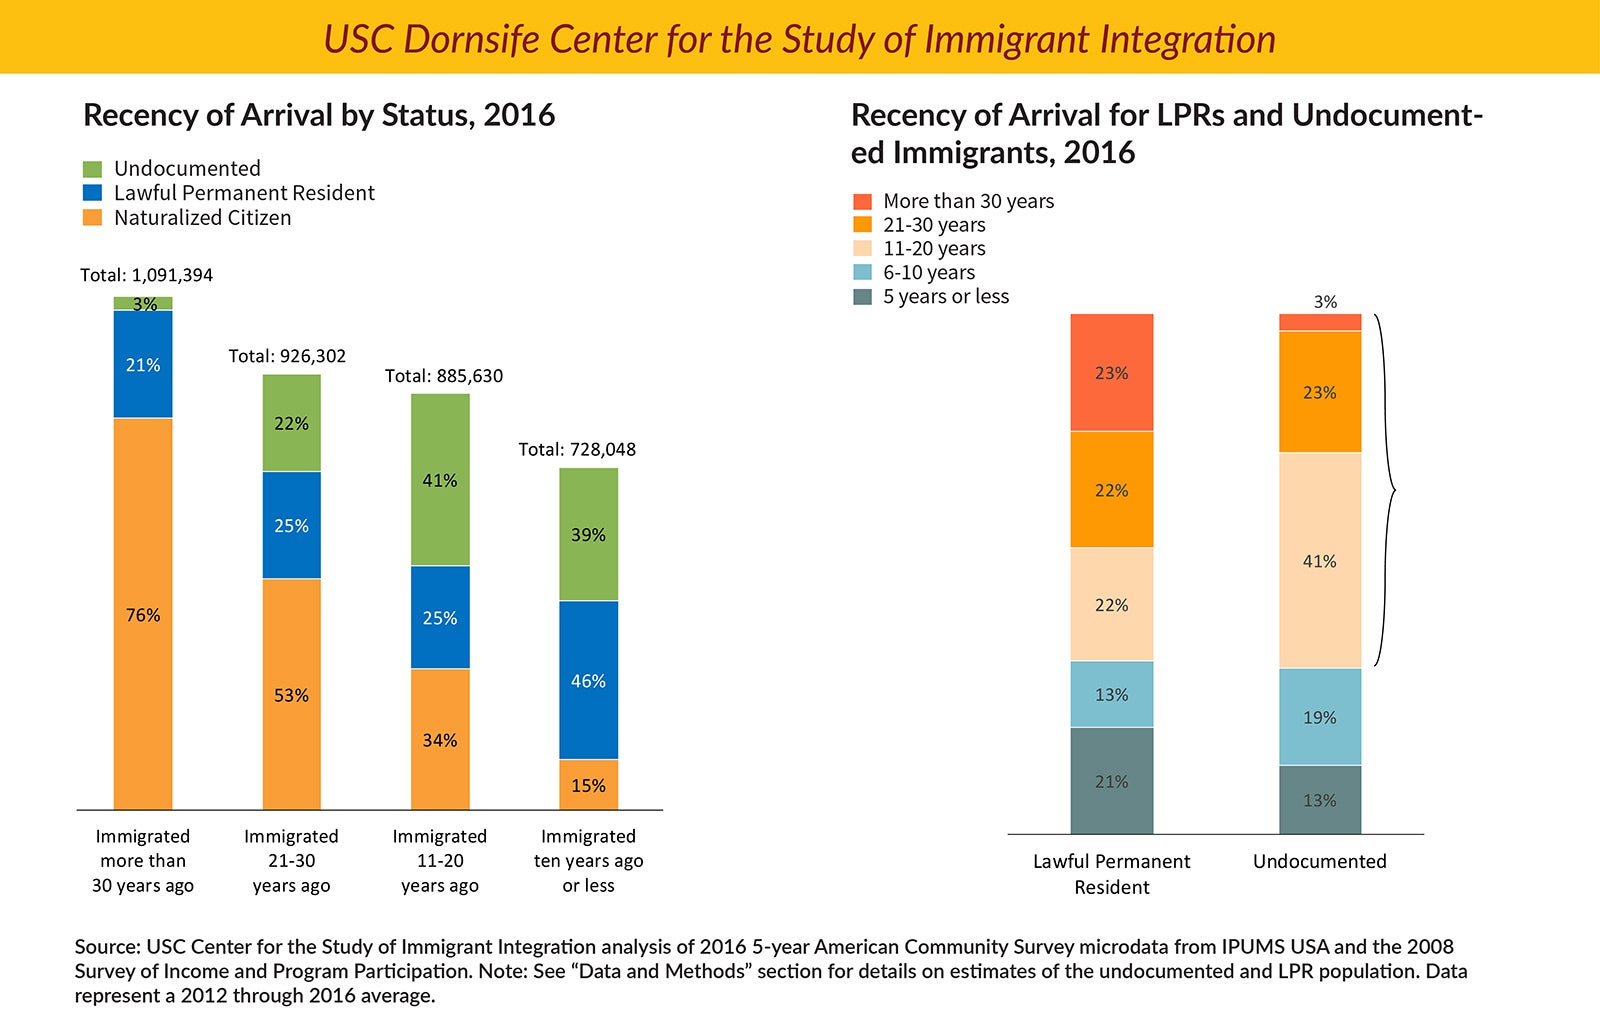 Chart showing how recently immigrants arrived